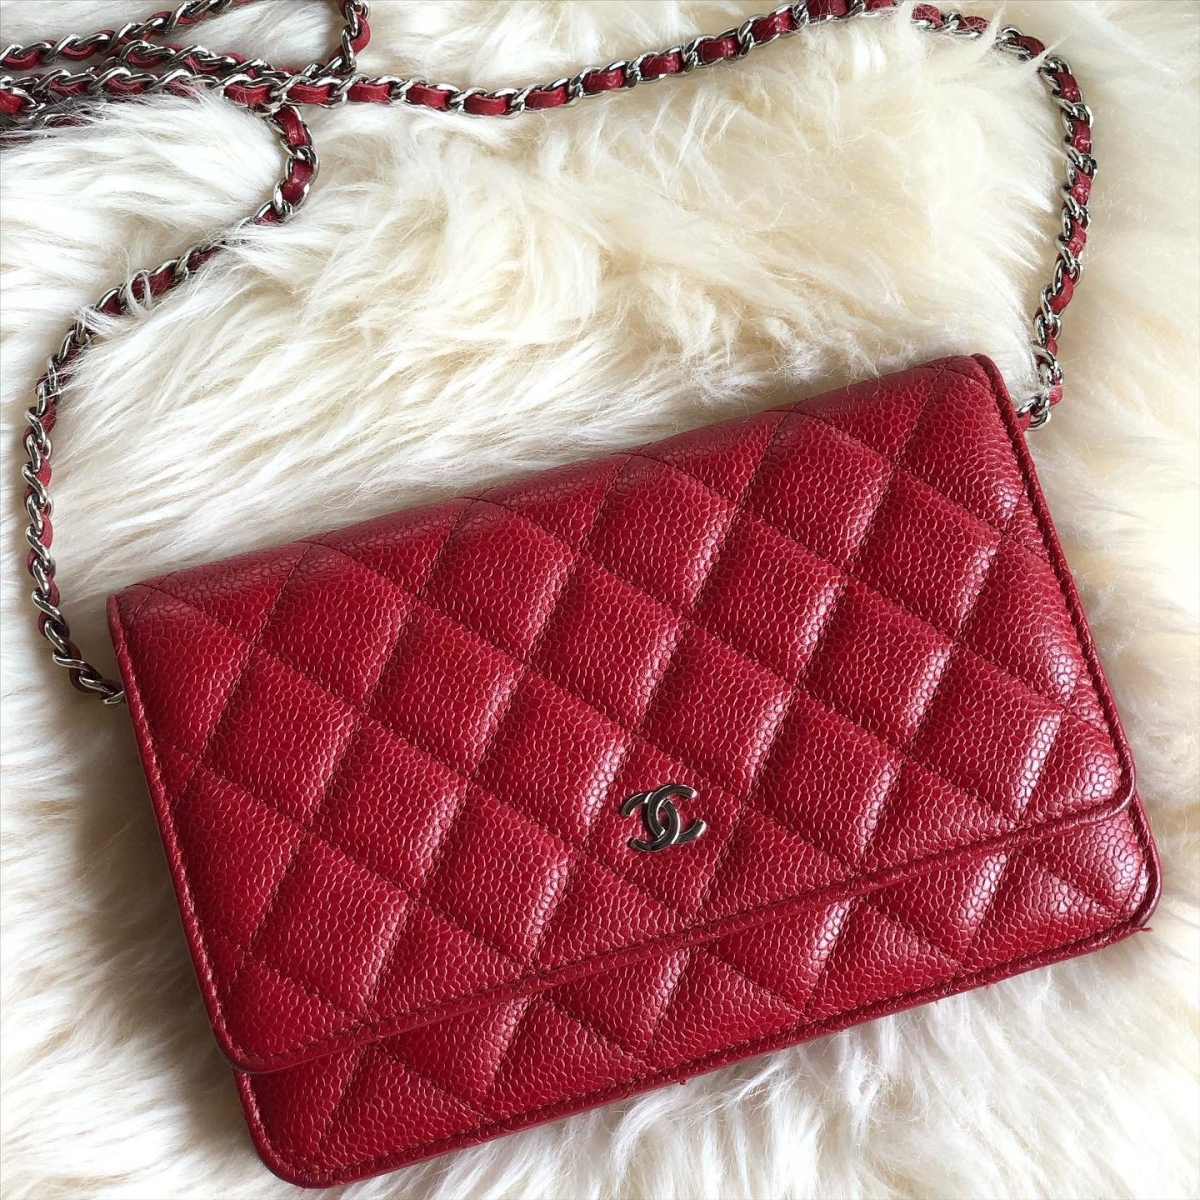 SOLD) Chanel Classic Wallet on Chain Red Caviar SHW Chanel Kuala Lumpur  (KL), Selangor, Malaysia. Supplier